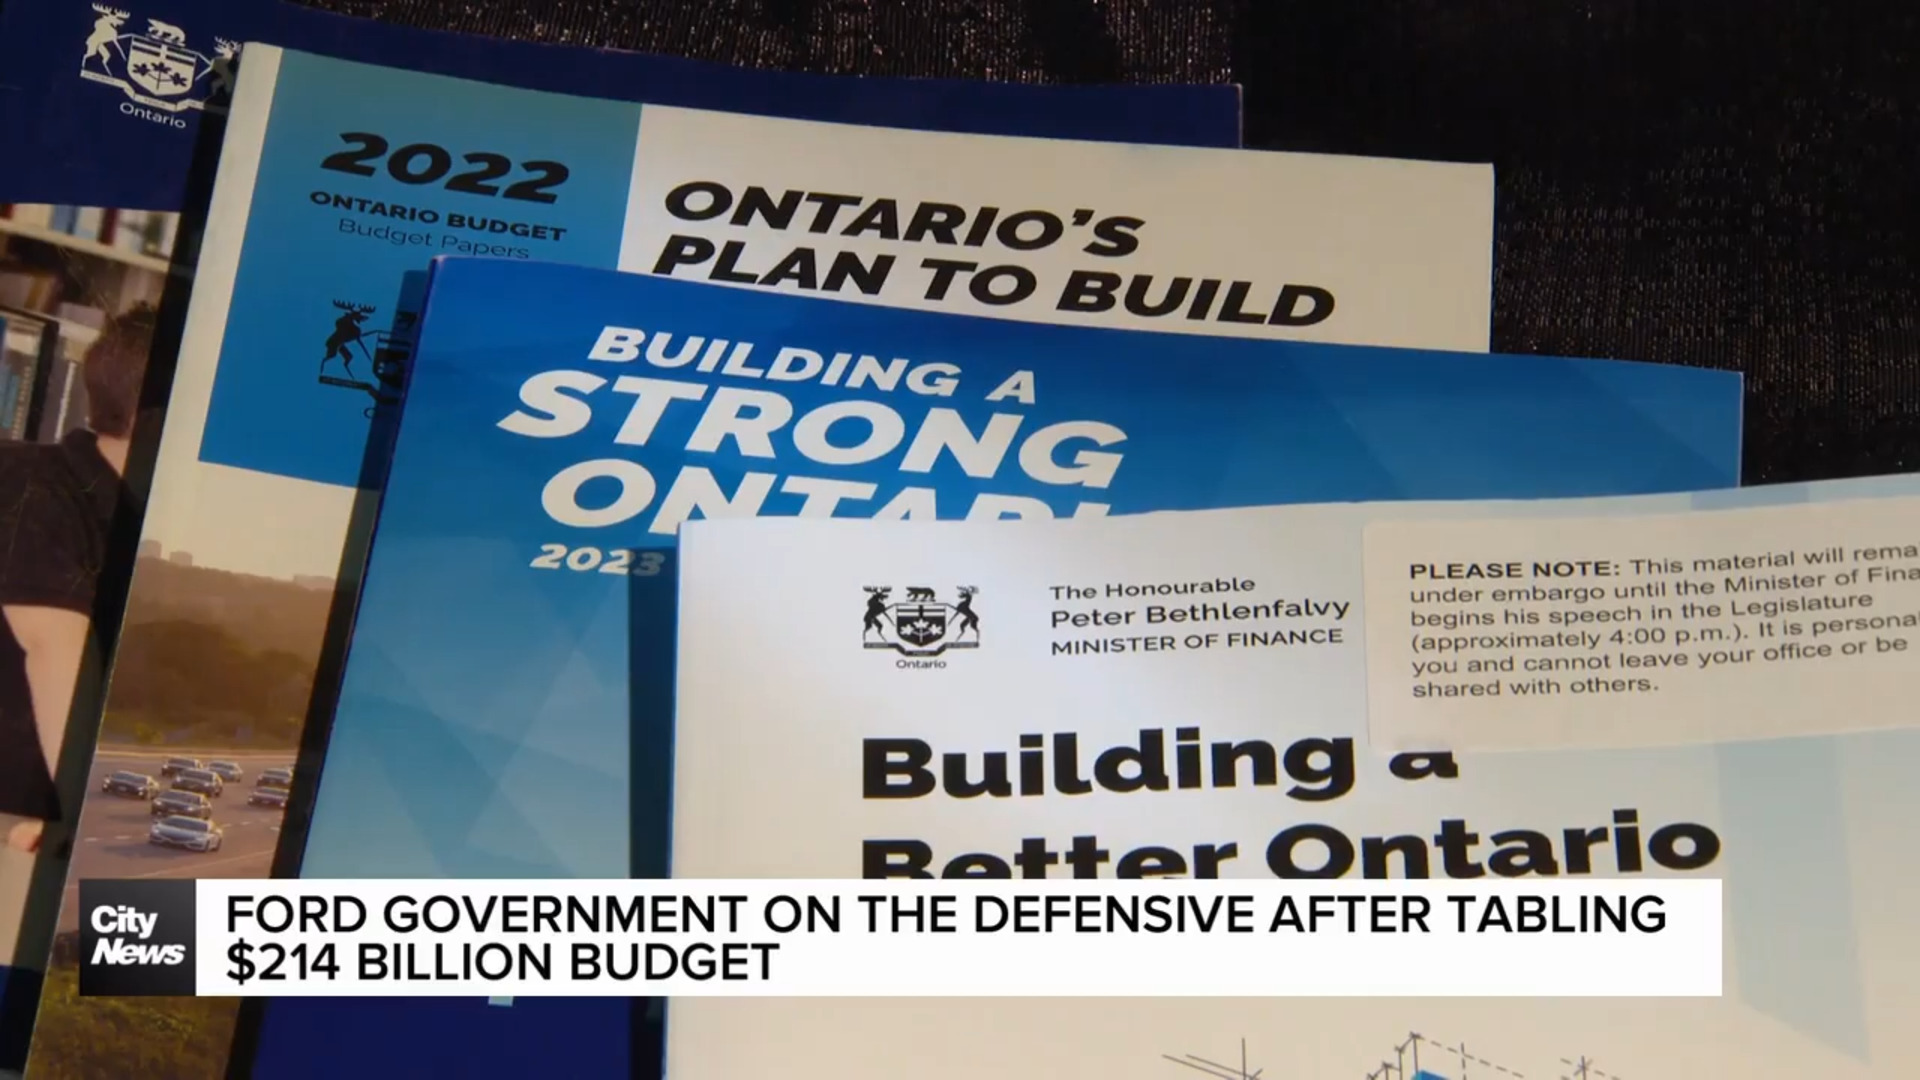 Ford government on the defensive after tabling $214 billion budget